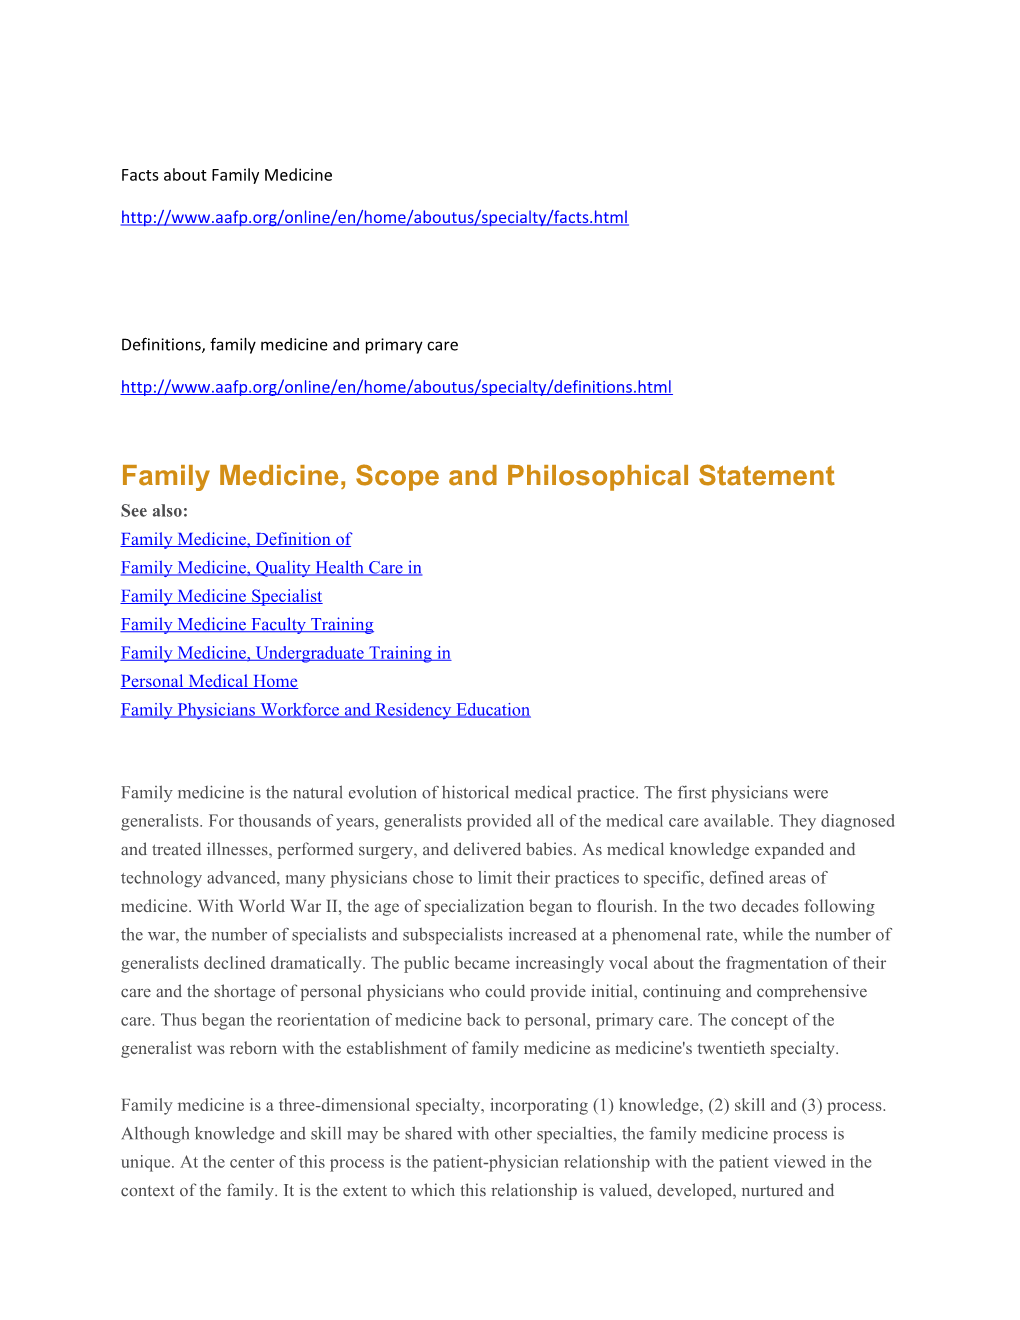 Family Medicine, Scope and Philosophical Statement